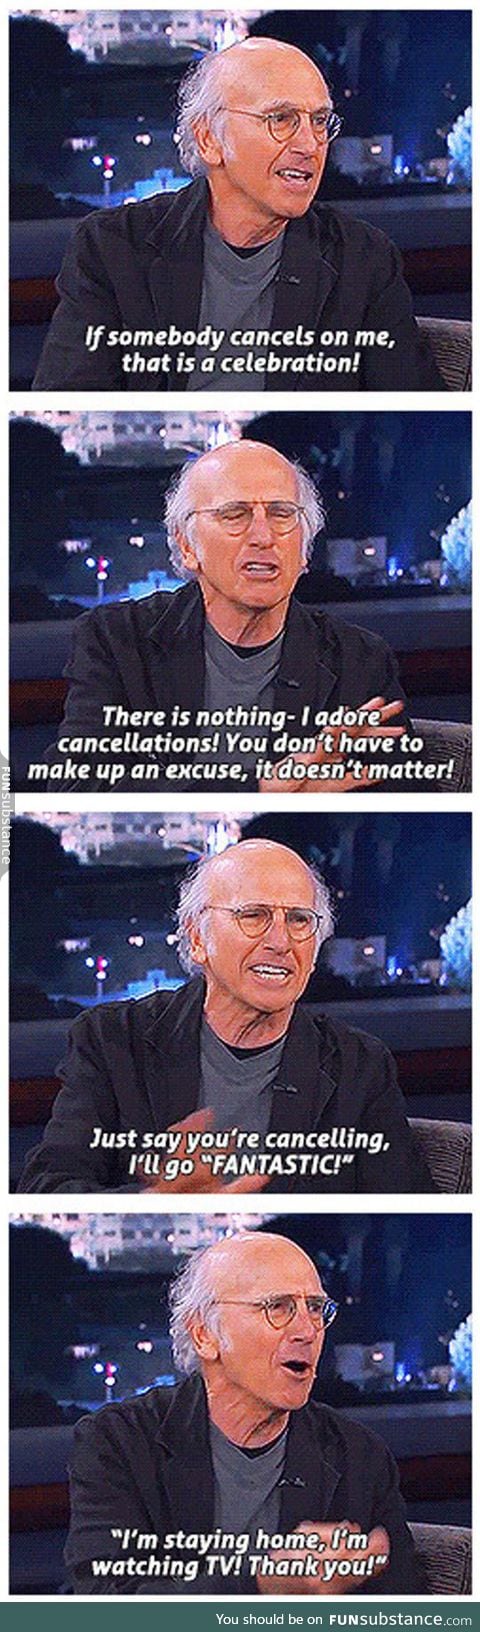 How larry david deals with cancellations